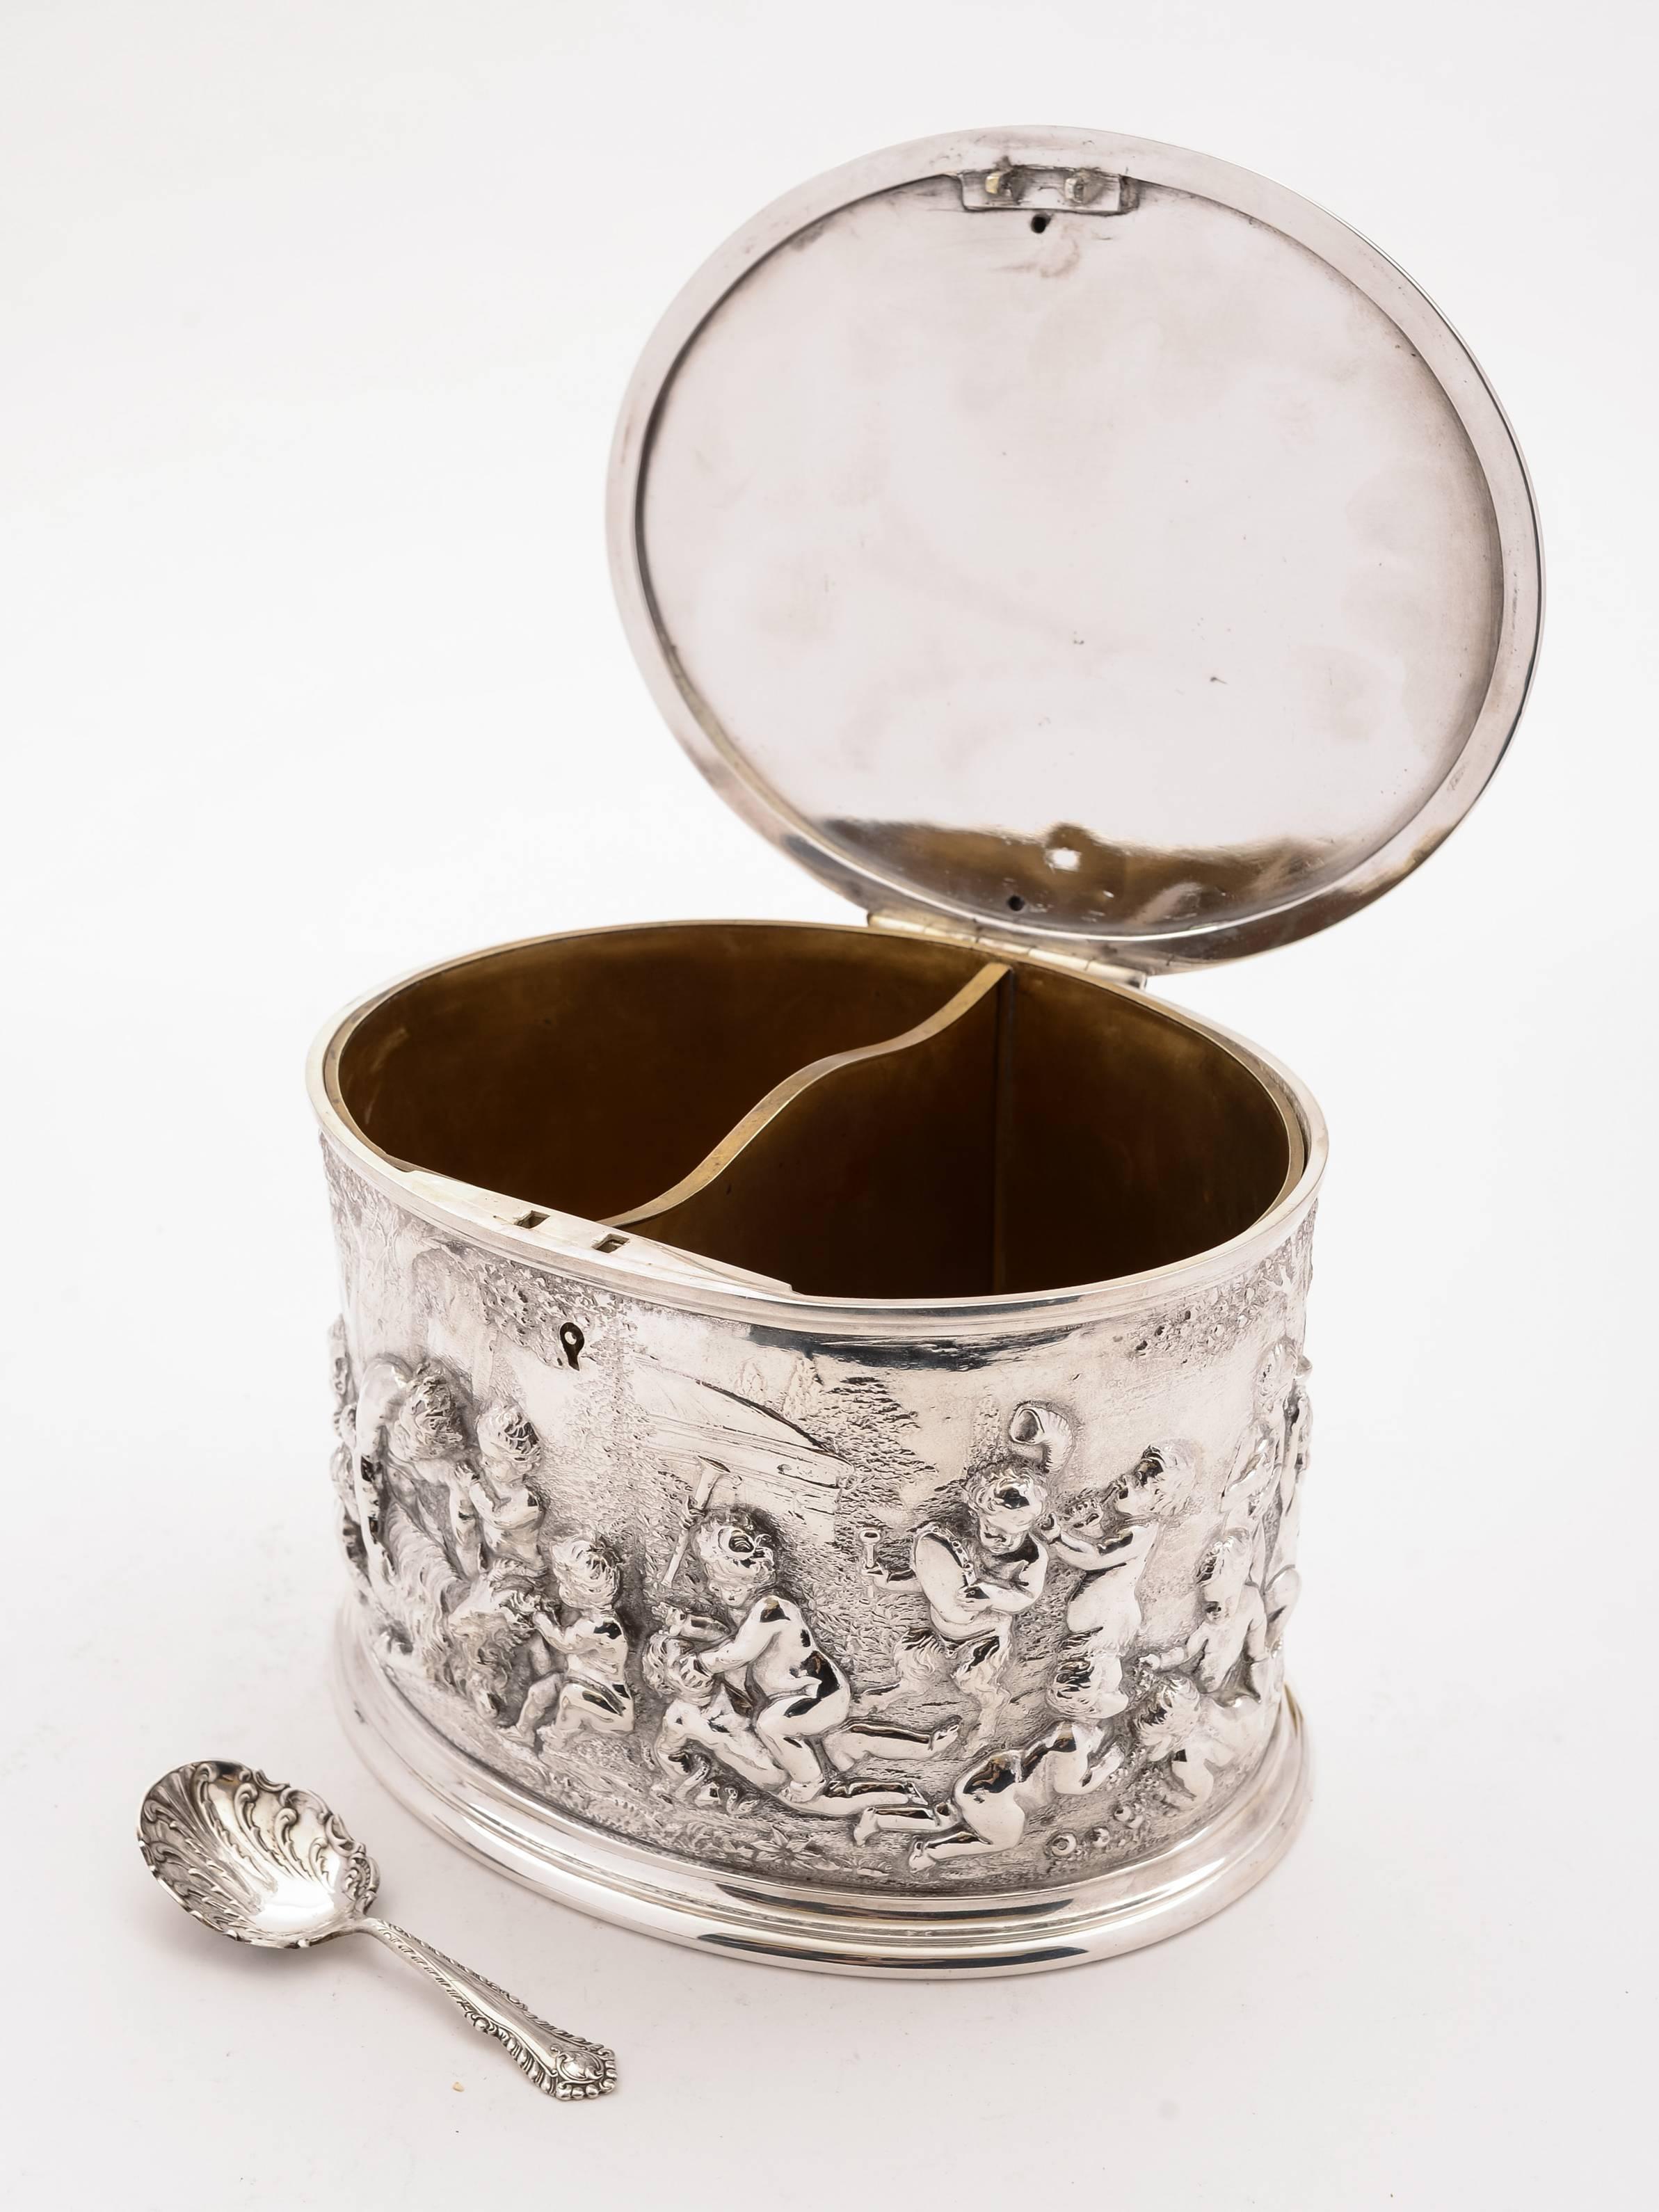 A grand English Victorian silver plated tea caddy with embossed cherub decoration and flip up lid which opens to reveal two interior compartments. The box is unmarked but is superb quality. Comes with embossed caddy spoon, circa